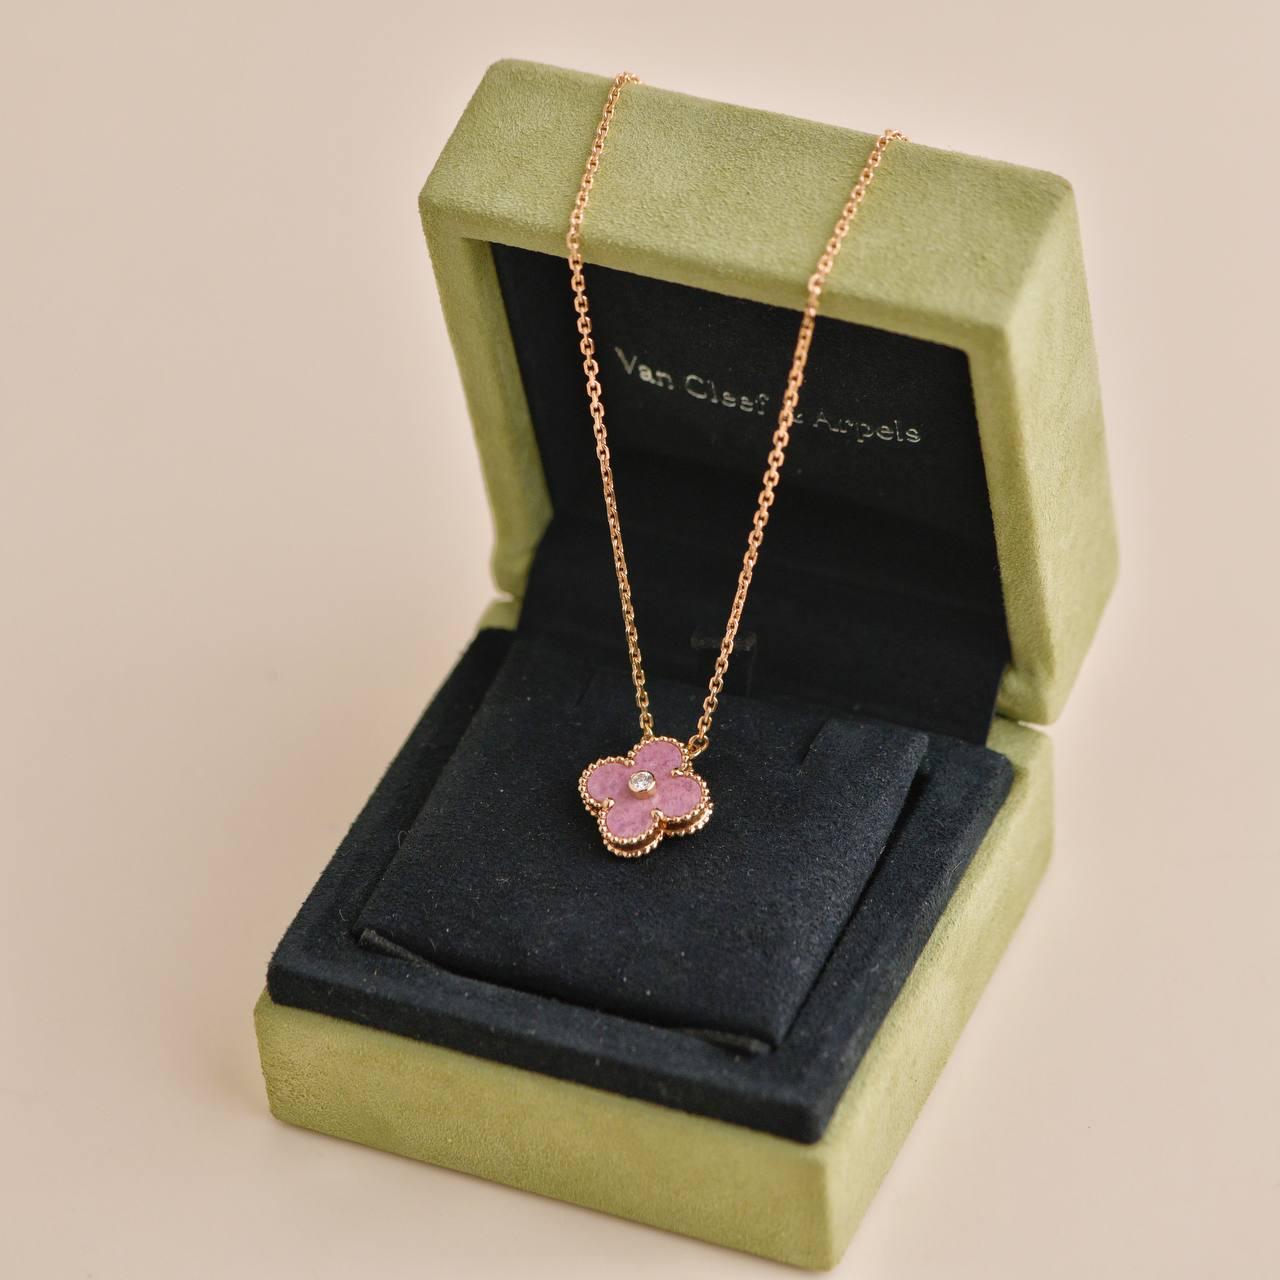 Used VCA Holiday Pendant – 18k Rose Gold Limited Edition was released in 2021 Christmas as the holiday pendant.

VCA doesn’t create this version anymore, truly a collective piece!

SKU 	AT-2021
Brand	Van Cleef & Arpels
Model	VCARP7TD00
Serial